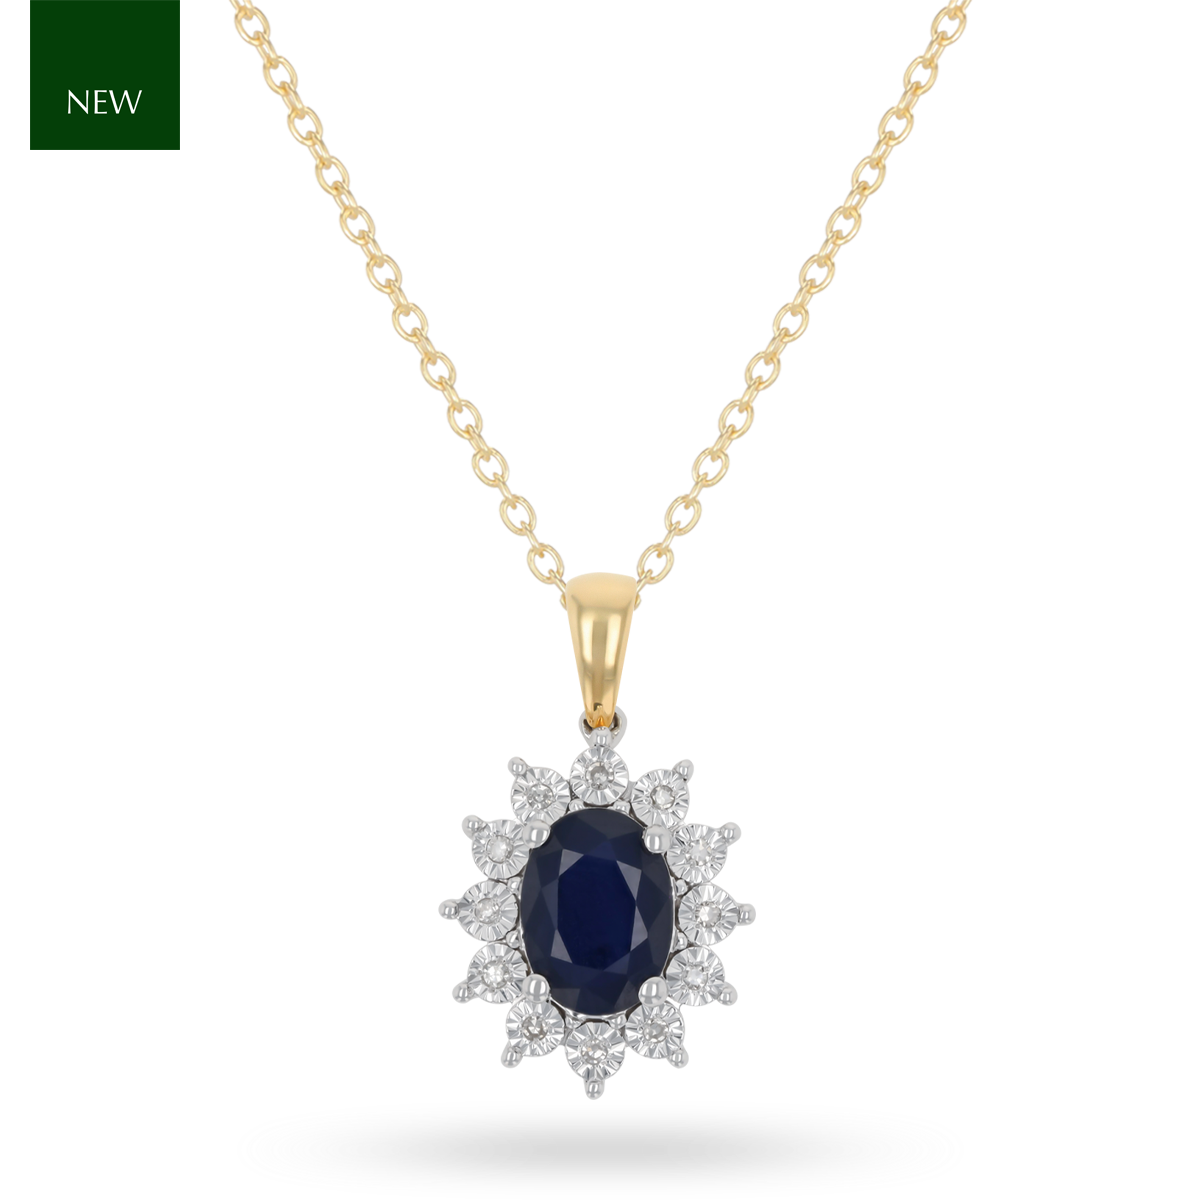 9ct White Gold Oval Shaped Sapphire & Diamond Cluster Pendant